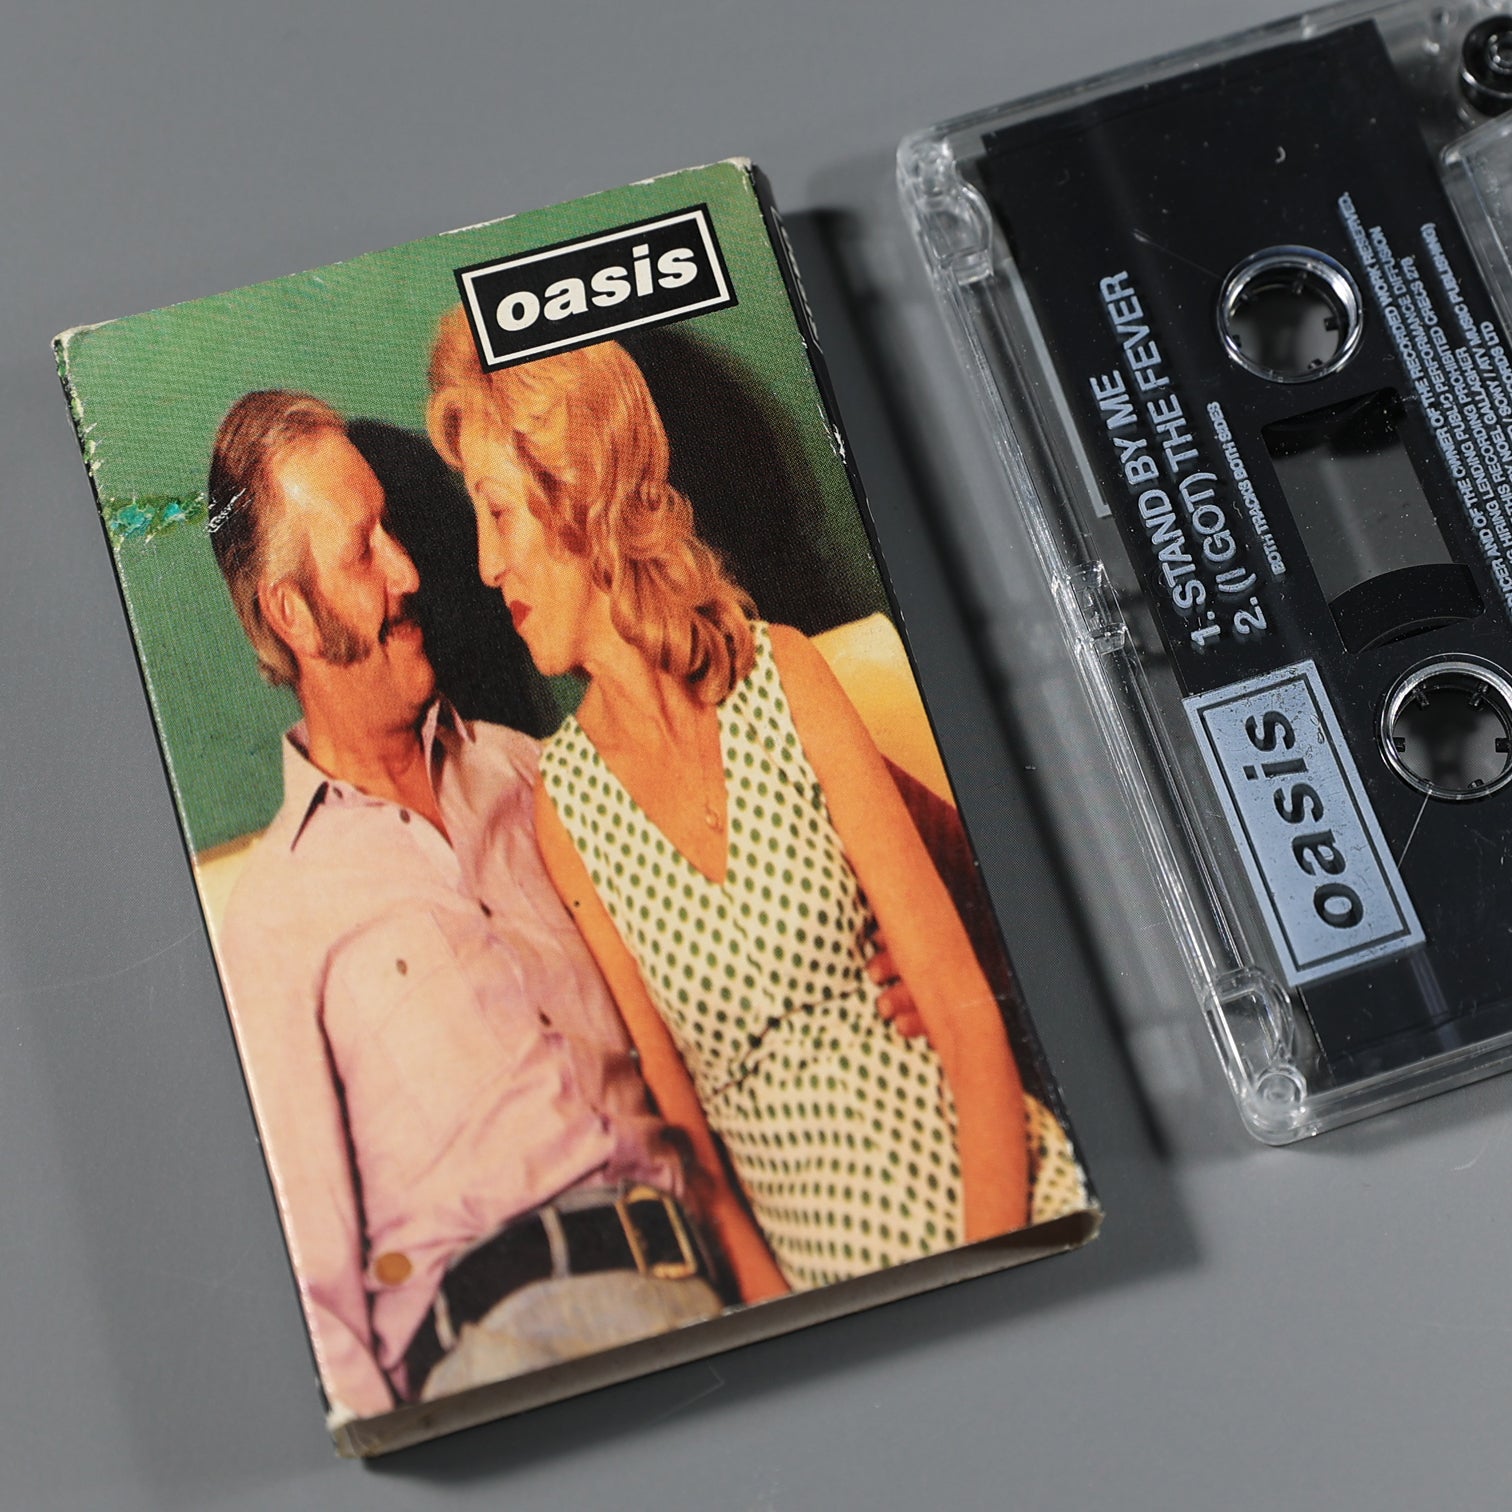 Oasis - Stand By Me Creation Records Cassette - New Item